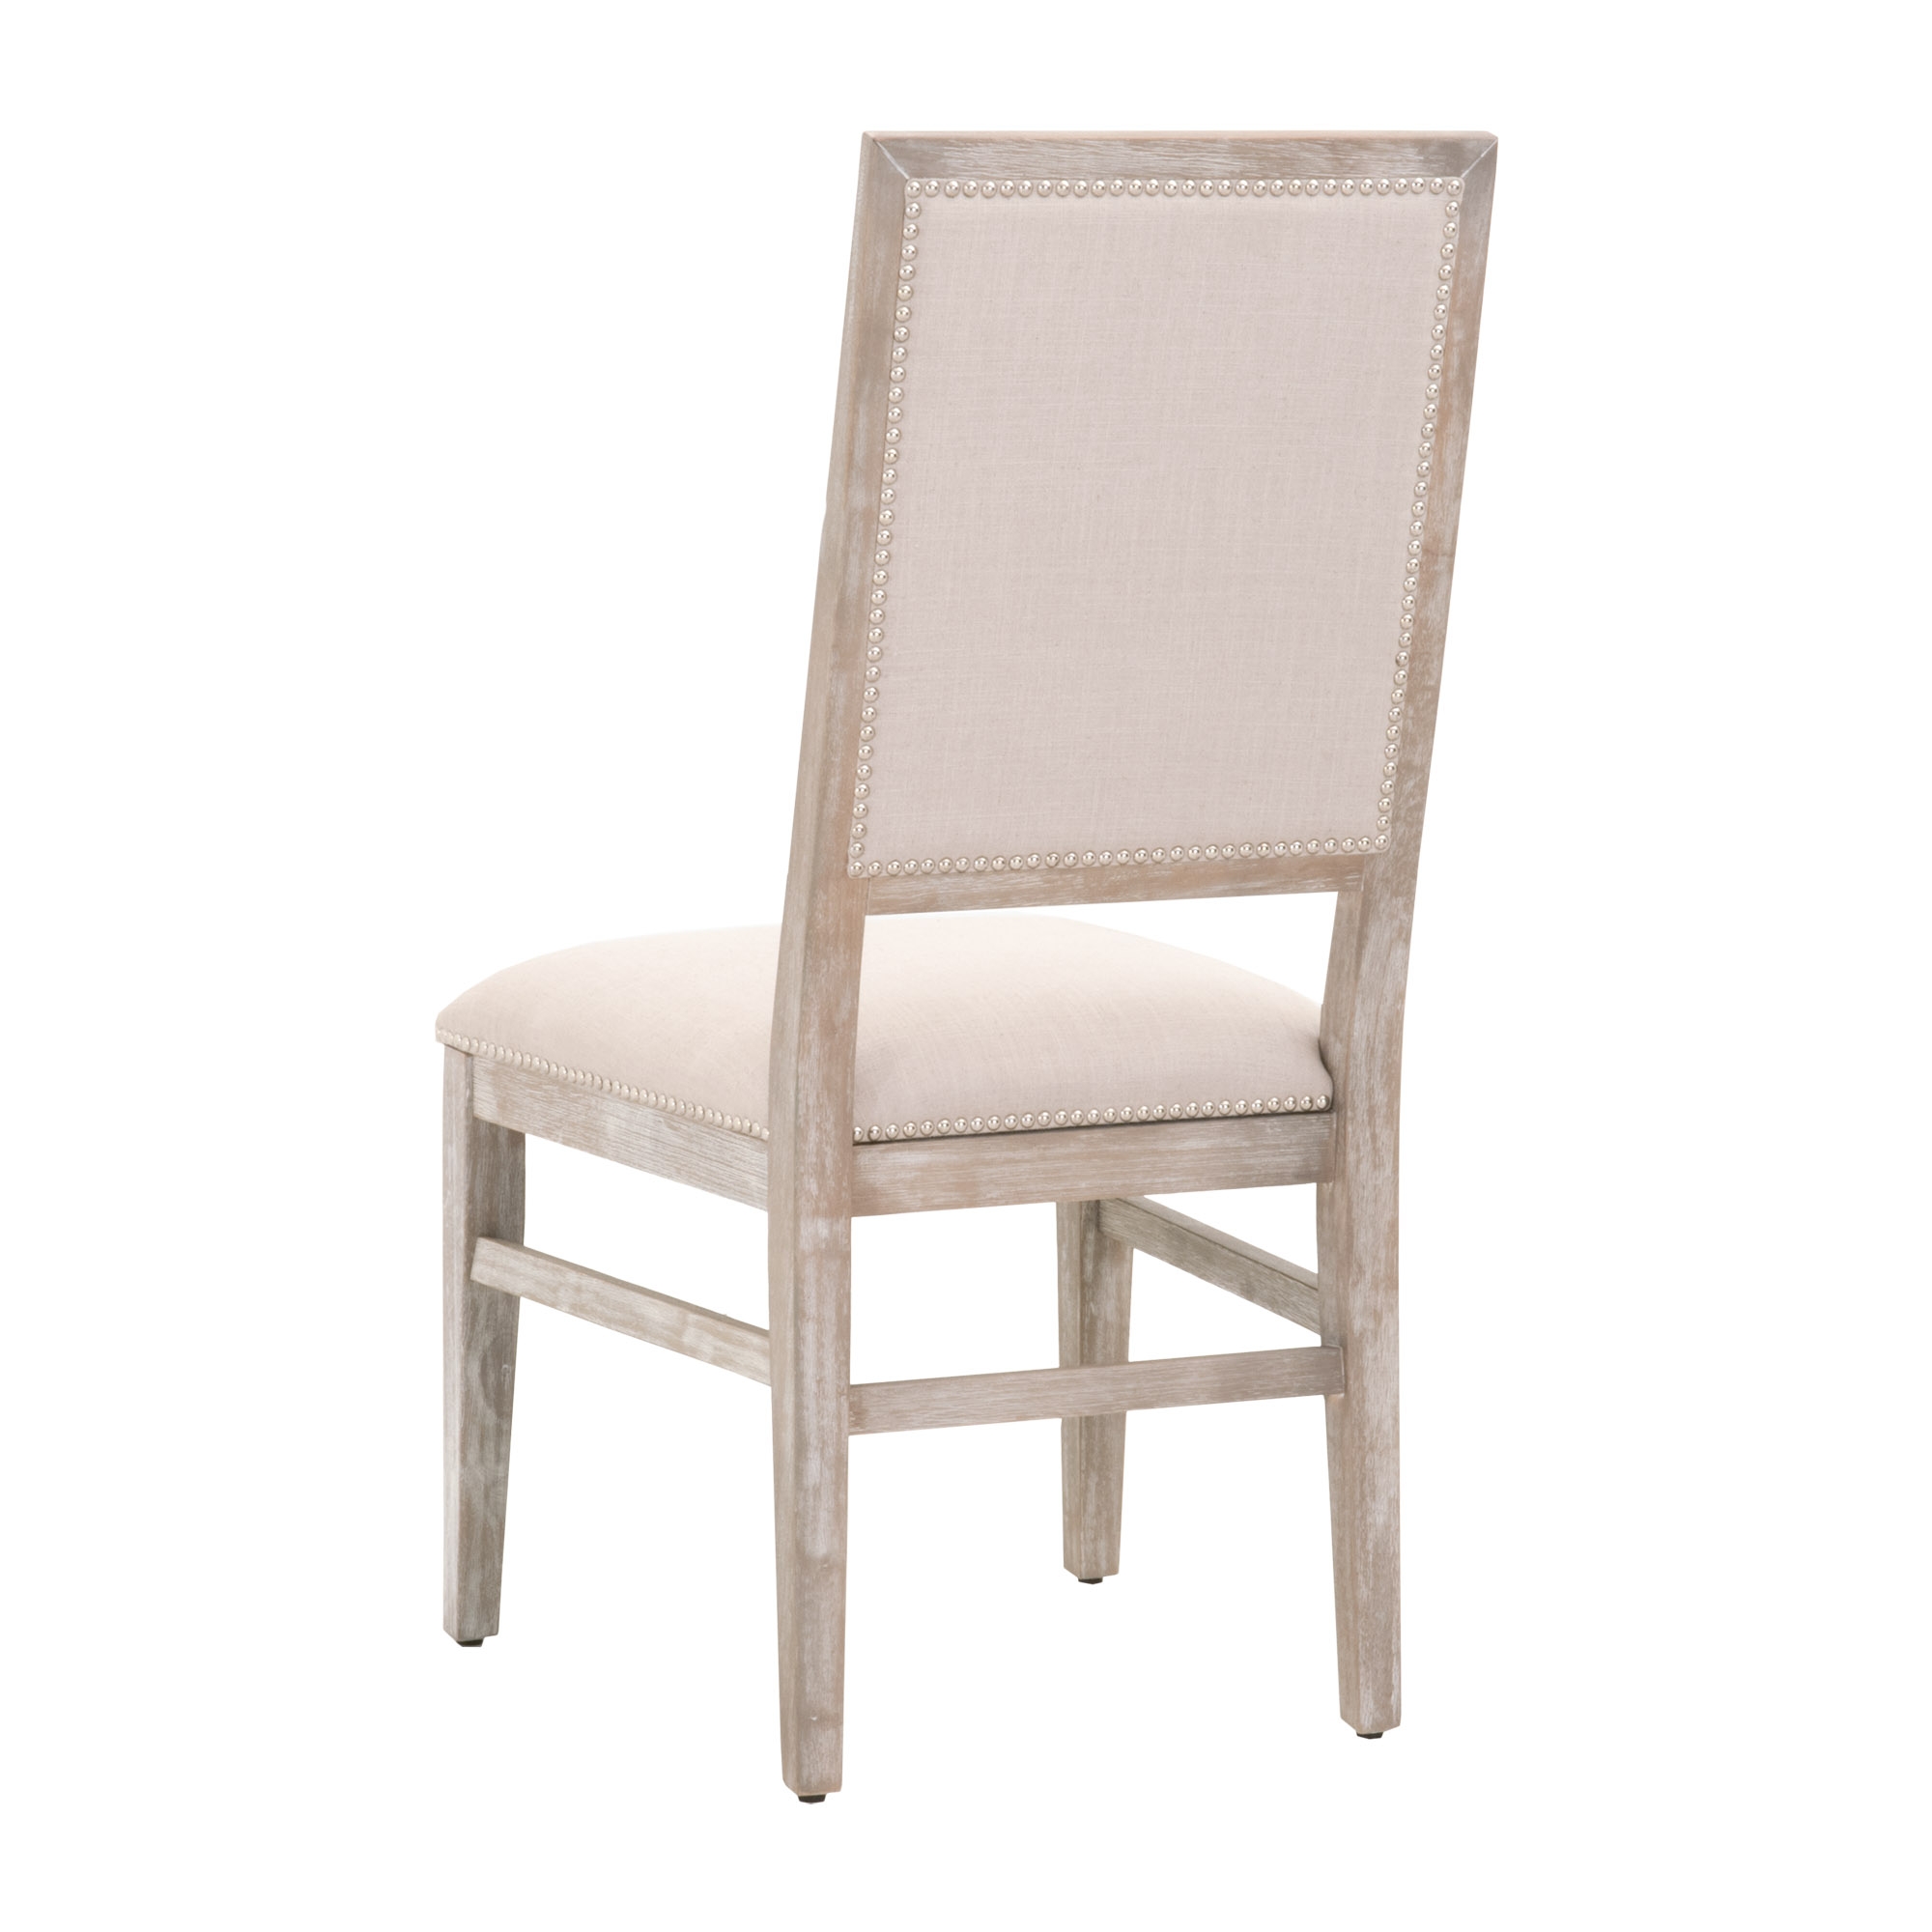 Dexter Dining Chair, Set of 2 - Image 3